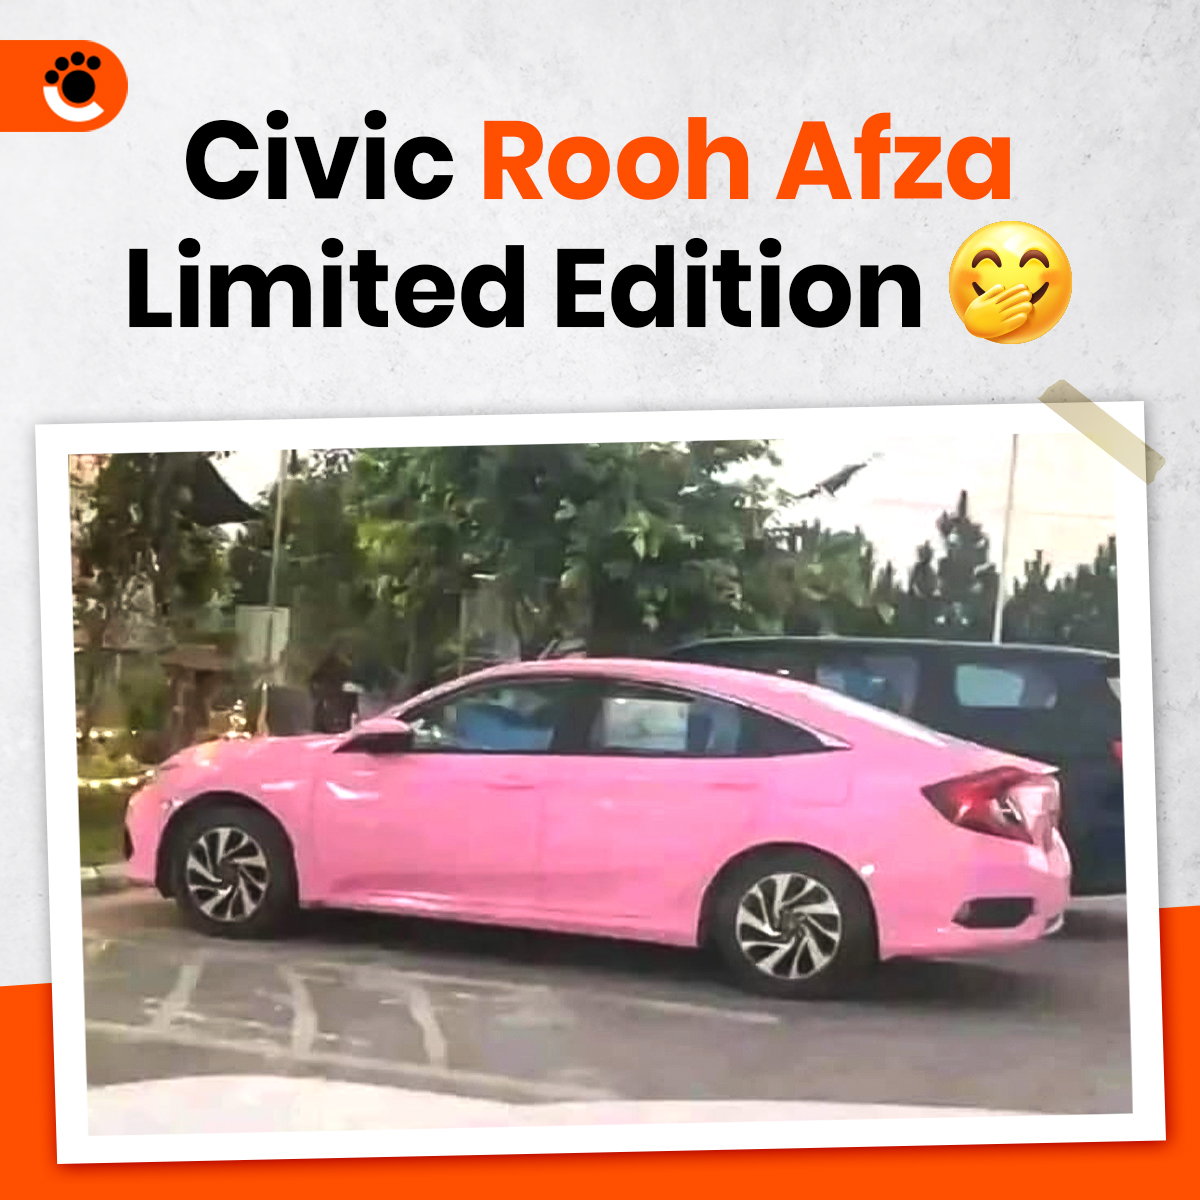 Civic Rooh Afza 🤣
Limited Edition 🚘🍹😅

#honda #hondacivic #RoohAfza #limitededition #limitedstock #memes #memesdaily #memesfunny #funny #funnymemes #onlinedelivery #doorstep #grocerydelivery #grocery #food #pharma #lahore #islamabad #rawalpindi #ecommerce #cmore #cheetay